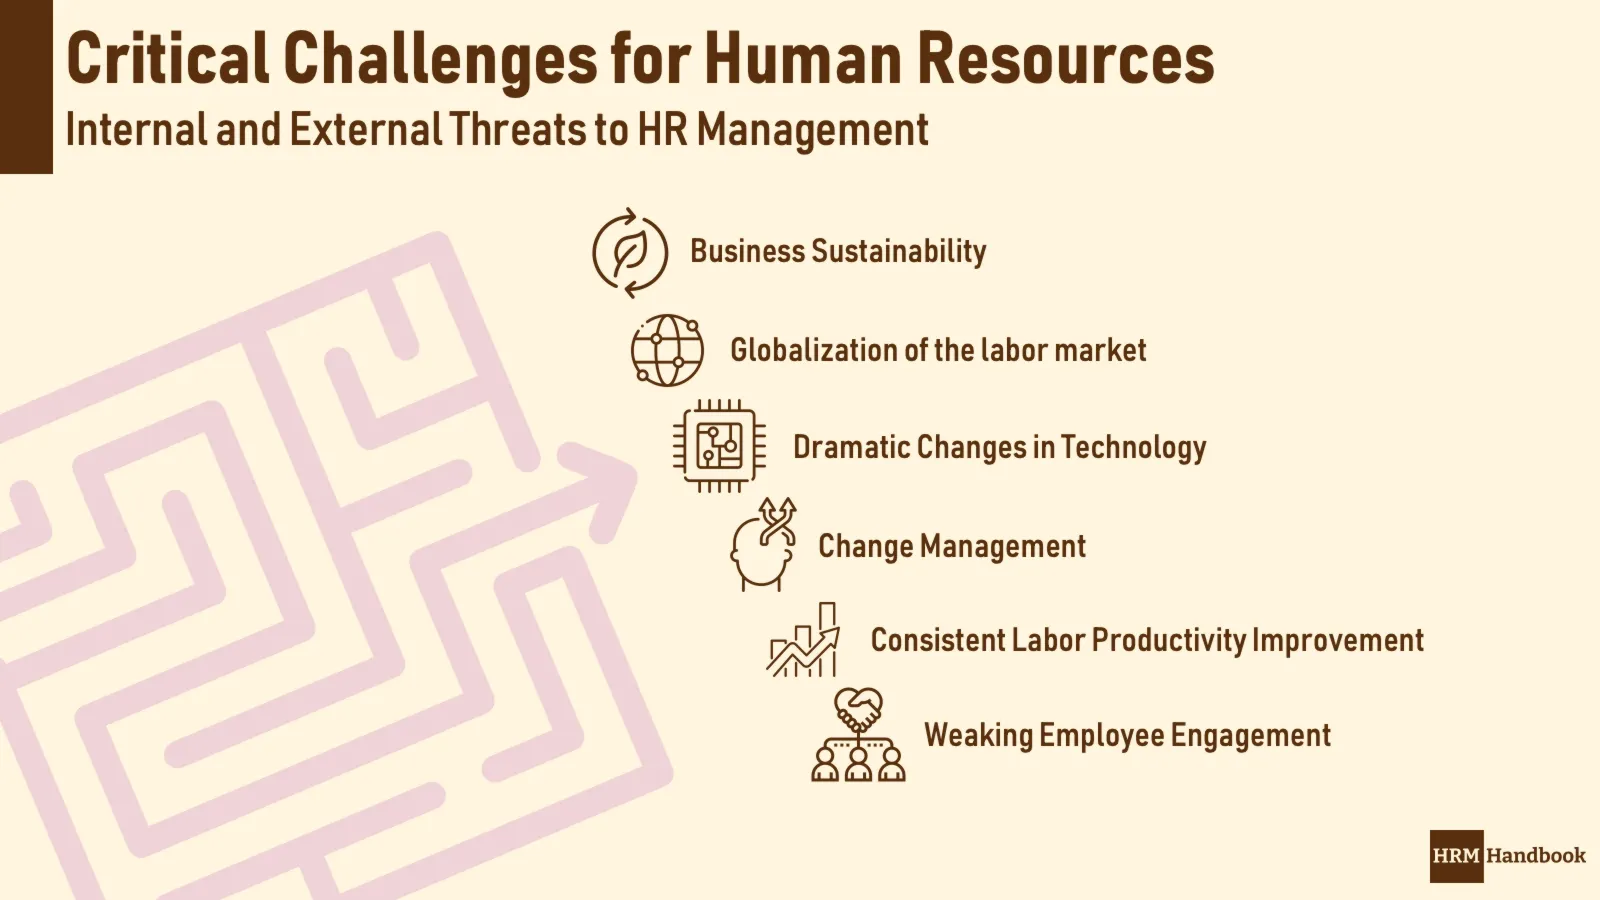 Most Critical and Threating HR Challenges